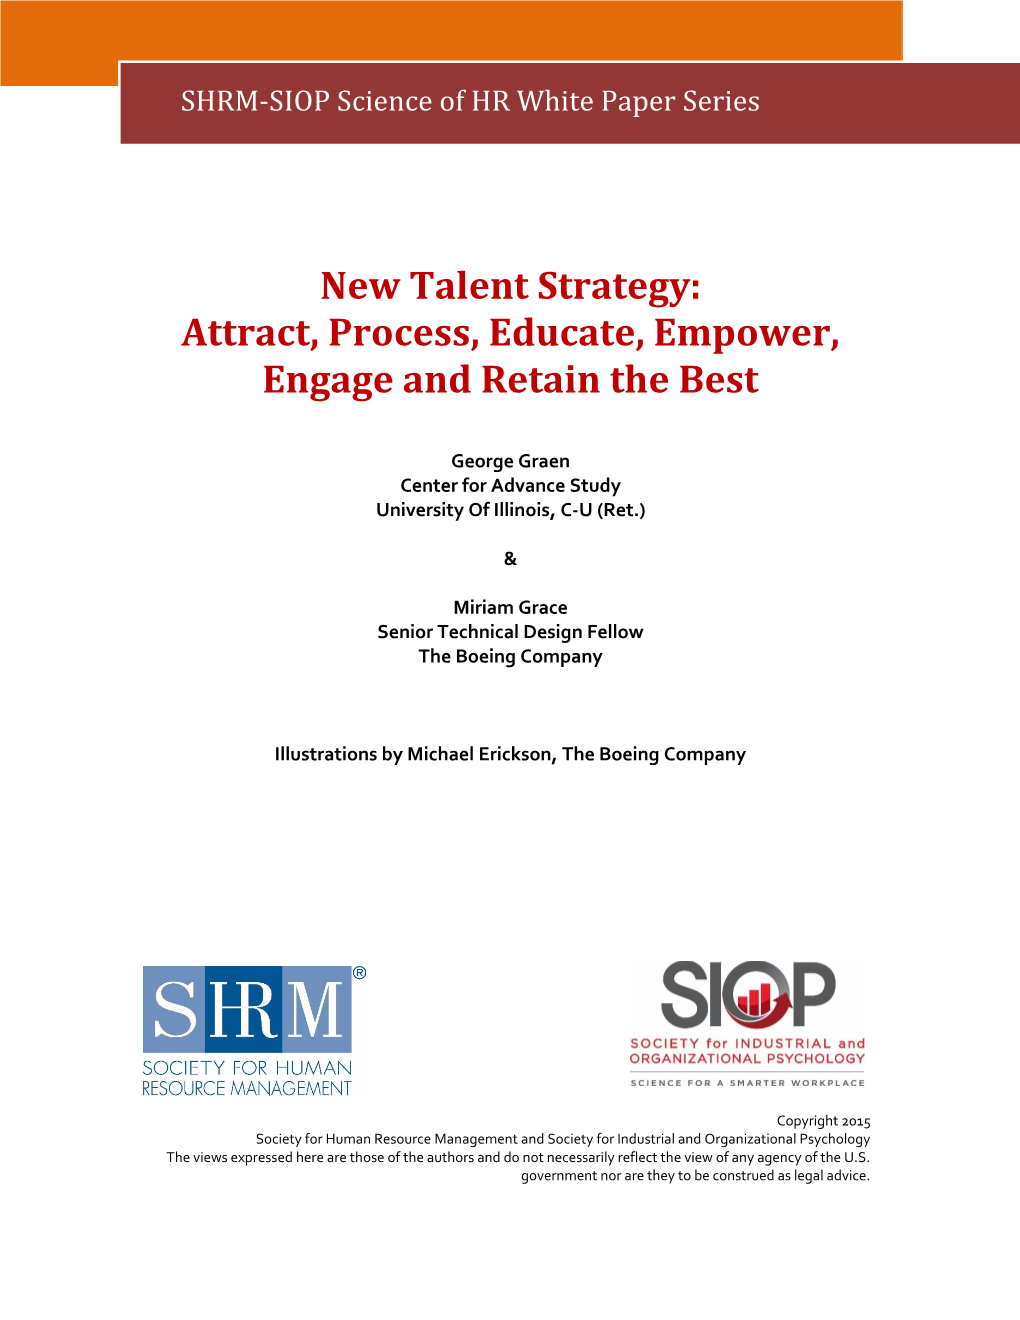 SHRM-SIOP: New Talent Strategy: Attract, Process, Educate, Empower